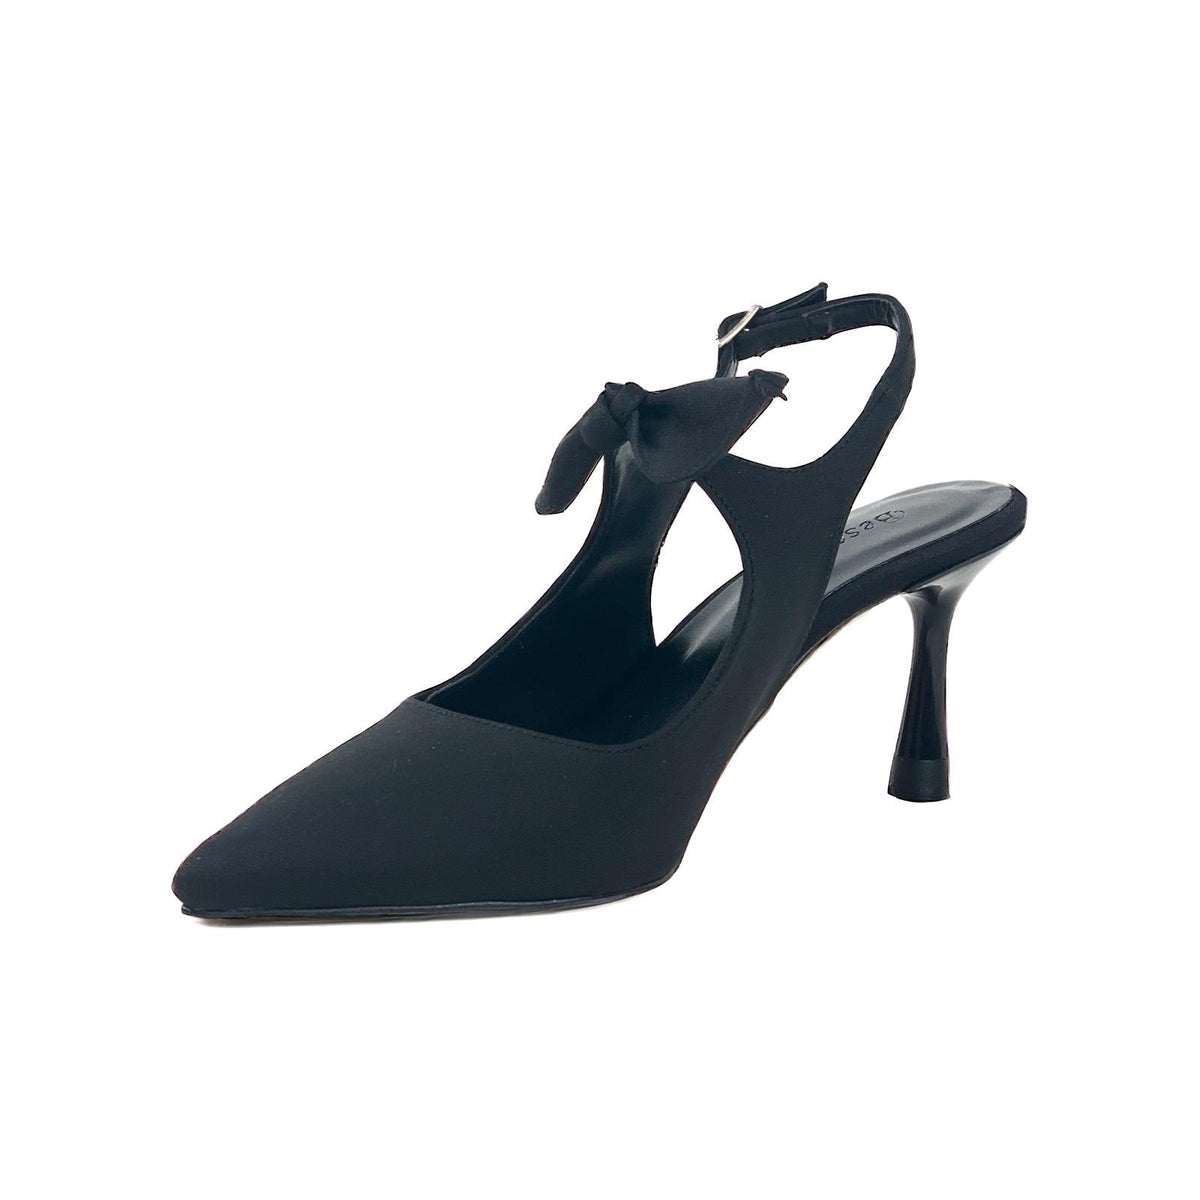 Women's Black Silk Material Tanb Bow Detailed Heeled Pointed Toe Shoes 7 cm Heel - STREETMODE ™